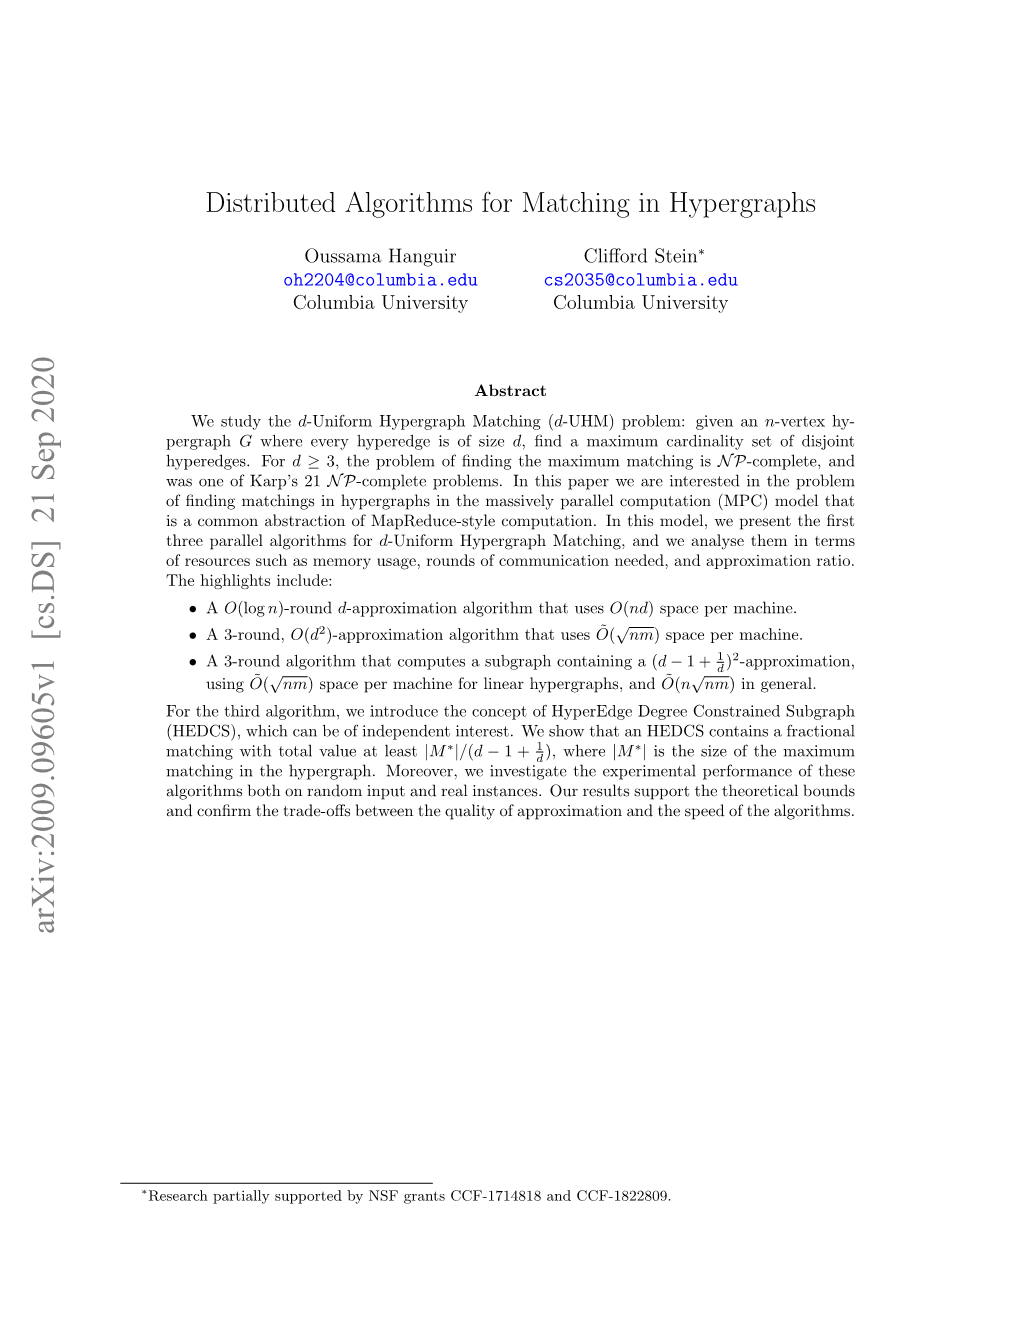 Distributed Algorithms for Matching in Hypergraphs